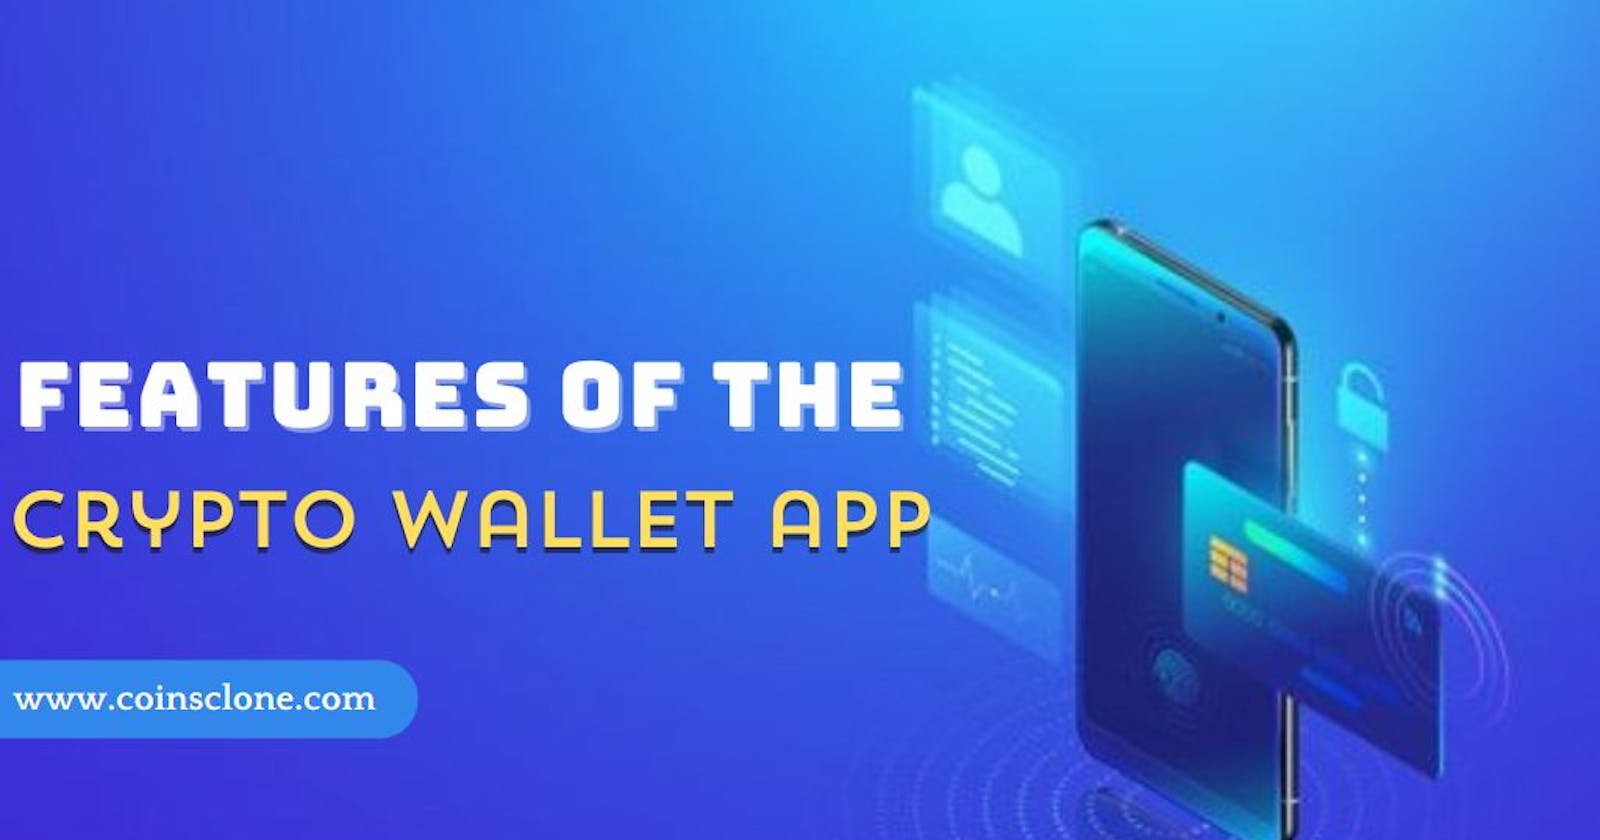 Key Features and Security Measures of Cryptocurrency Wallet Apps